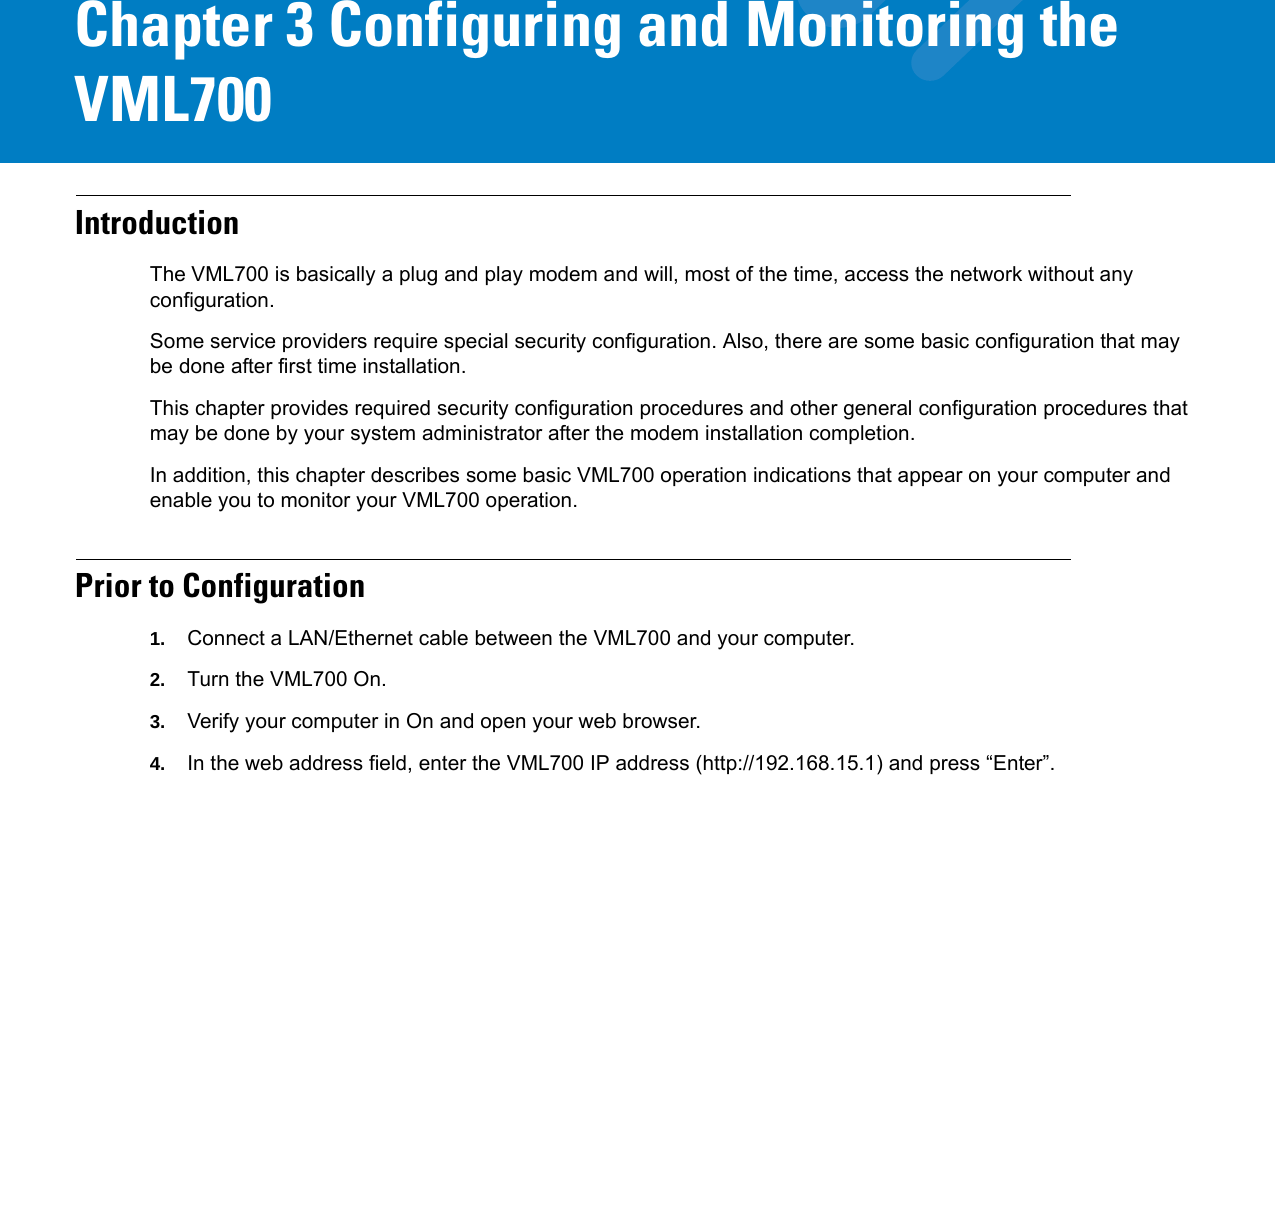 Chapter 3 Configuring and Monitoring the VML700IntroductionThe VML700 is basically a plug and play modem and will, most of the time, access the network without any configuration.Some service providers require special security configuration. Also, there are some basic configuration that may be done after first time installation.This chapter provides required security configuration procedures and other general configuration procedures that may be done by your system administrator after the modem installation completion.In addition, this chapter describes some basic VML700 operation indications that appear on your computer and enable you to monitor your VML700 operation.Prior to Configuration1. Connect a LAN/Ethernet cable between the VML700 and your computer.2. Turn the VML700 On.3. Verify your computer in On and open your web browser.4. In the web address field, enter the VML700 IP address (http://192.168.15.1) and press “Enter”.